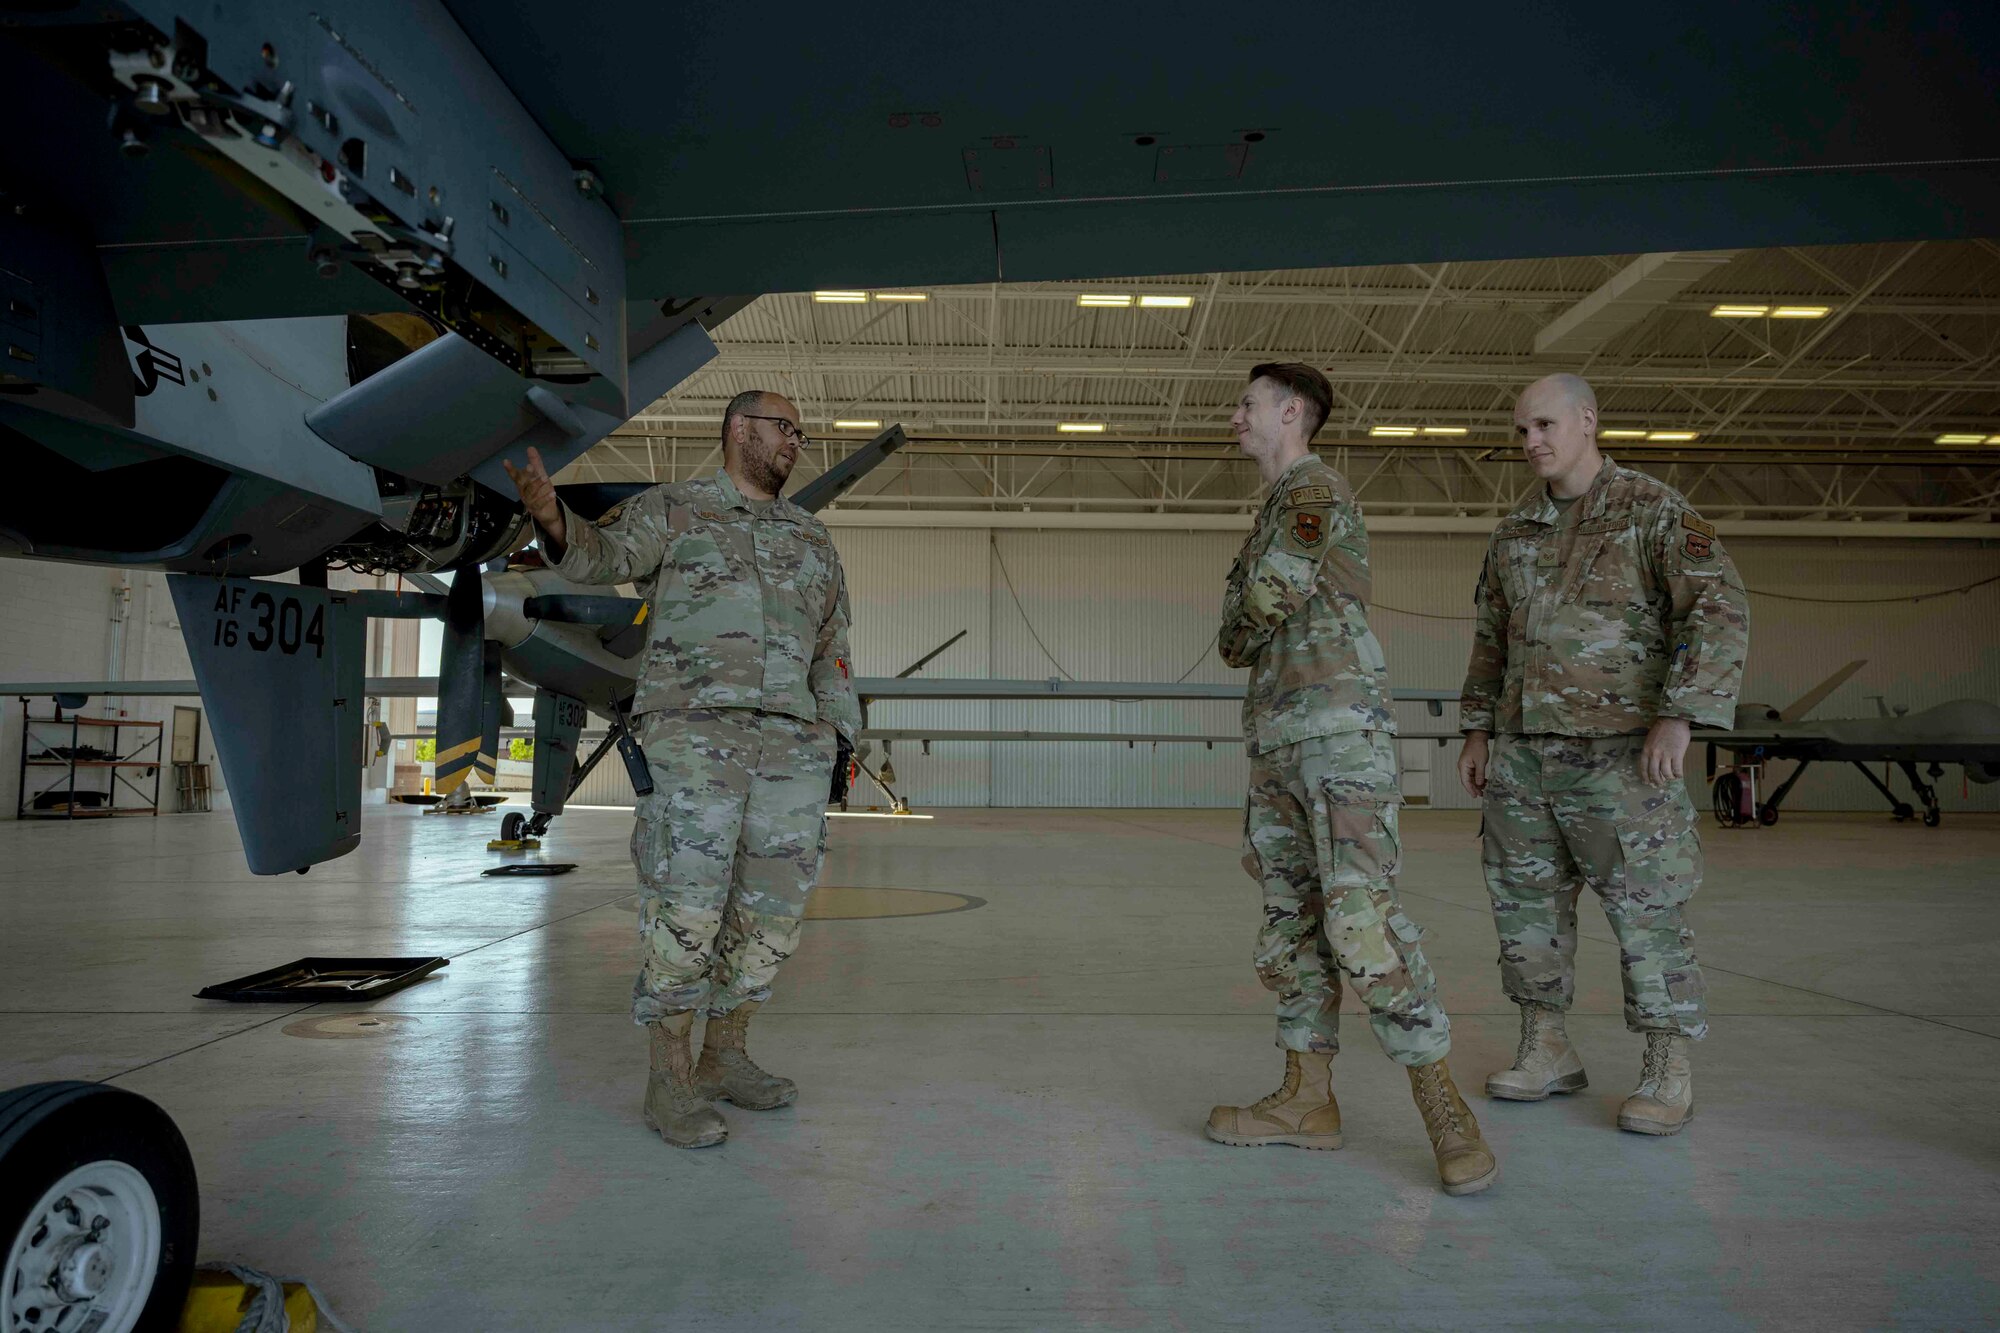 U.S. Air Force Staff Sgt. Keith Hundley, 9th Aircraft Maintenance Unit dedicated crew chief, left, gives a quick overview of the MQ-9 Reaper to two Airmen participating in a job swap event at Holloman Air Force Base, New Mexico, April 28, 2023. Three Airmen, from varying squadrons, spent the day with maintainers to learn the daily operations and procedures the 9th AMU conducts. (U.S. Air Force photo by Senior Airman Antonio Salfran)